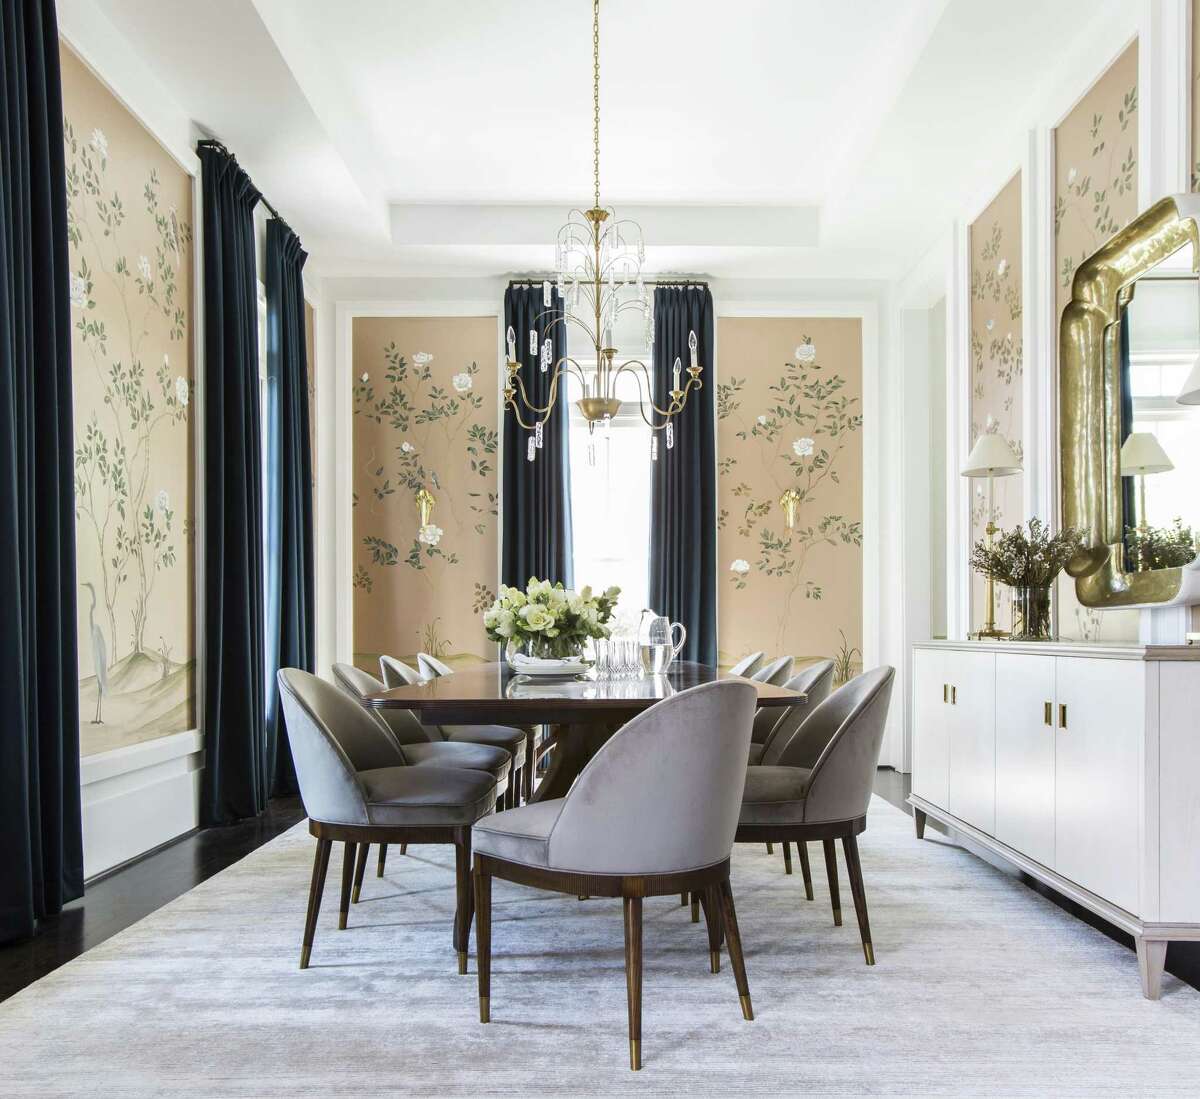 AFTER: The dining room of Angela and J.D. Slaughter, designed by Marie Flanigan Interiors, features a hand-painted mural by Segreto Finishes in Houston.